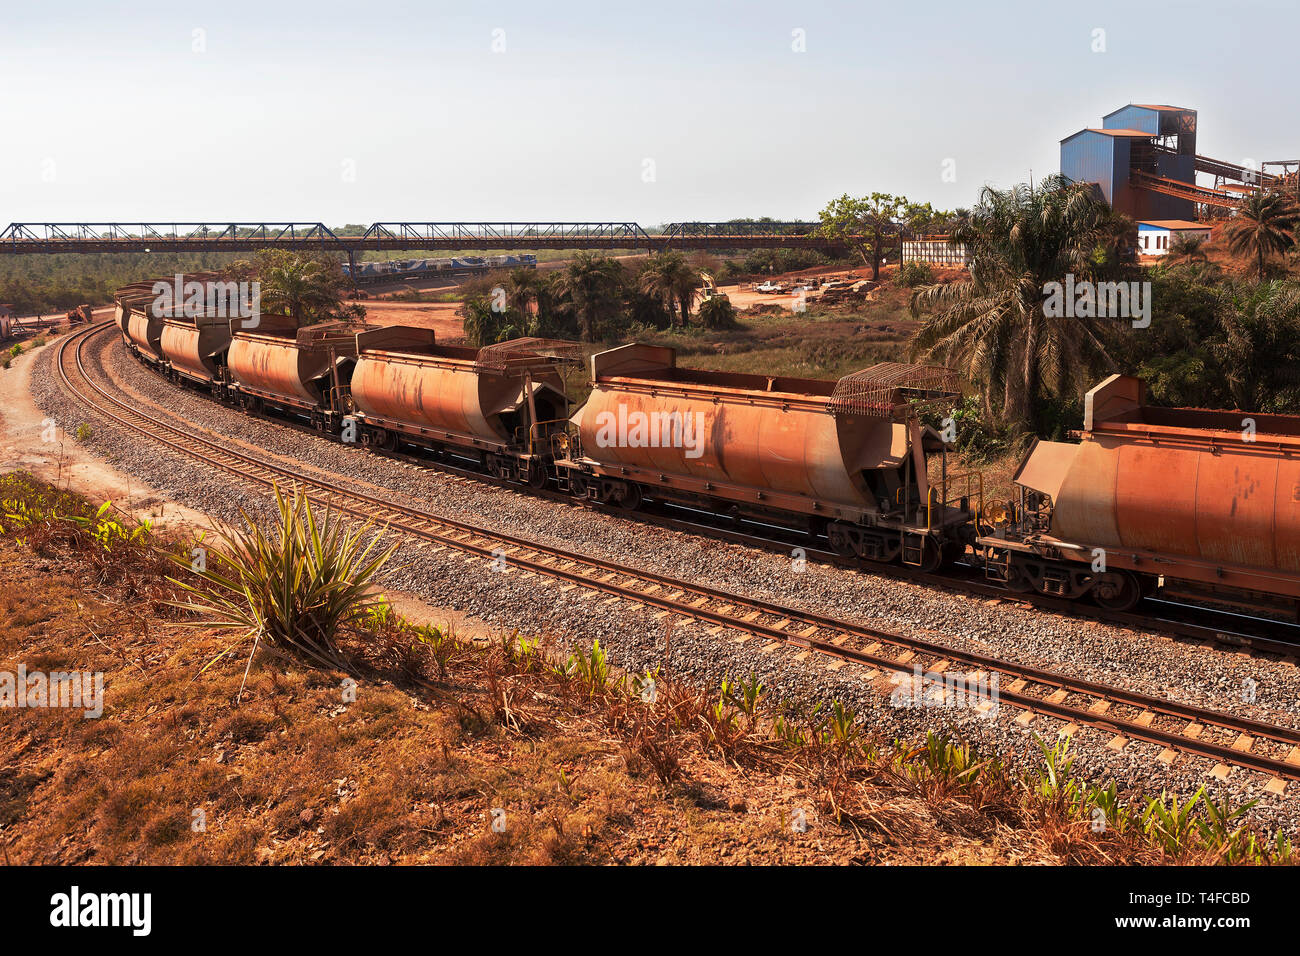 Rail & port operations for managing & transporting iron ore. Train on rail loop under loading jetty conveyor belt after discharge, with empty wagons Stock Photo